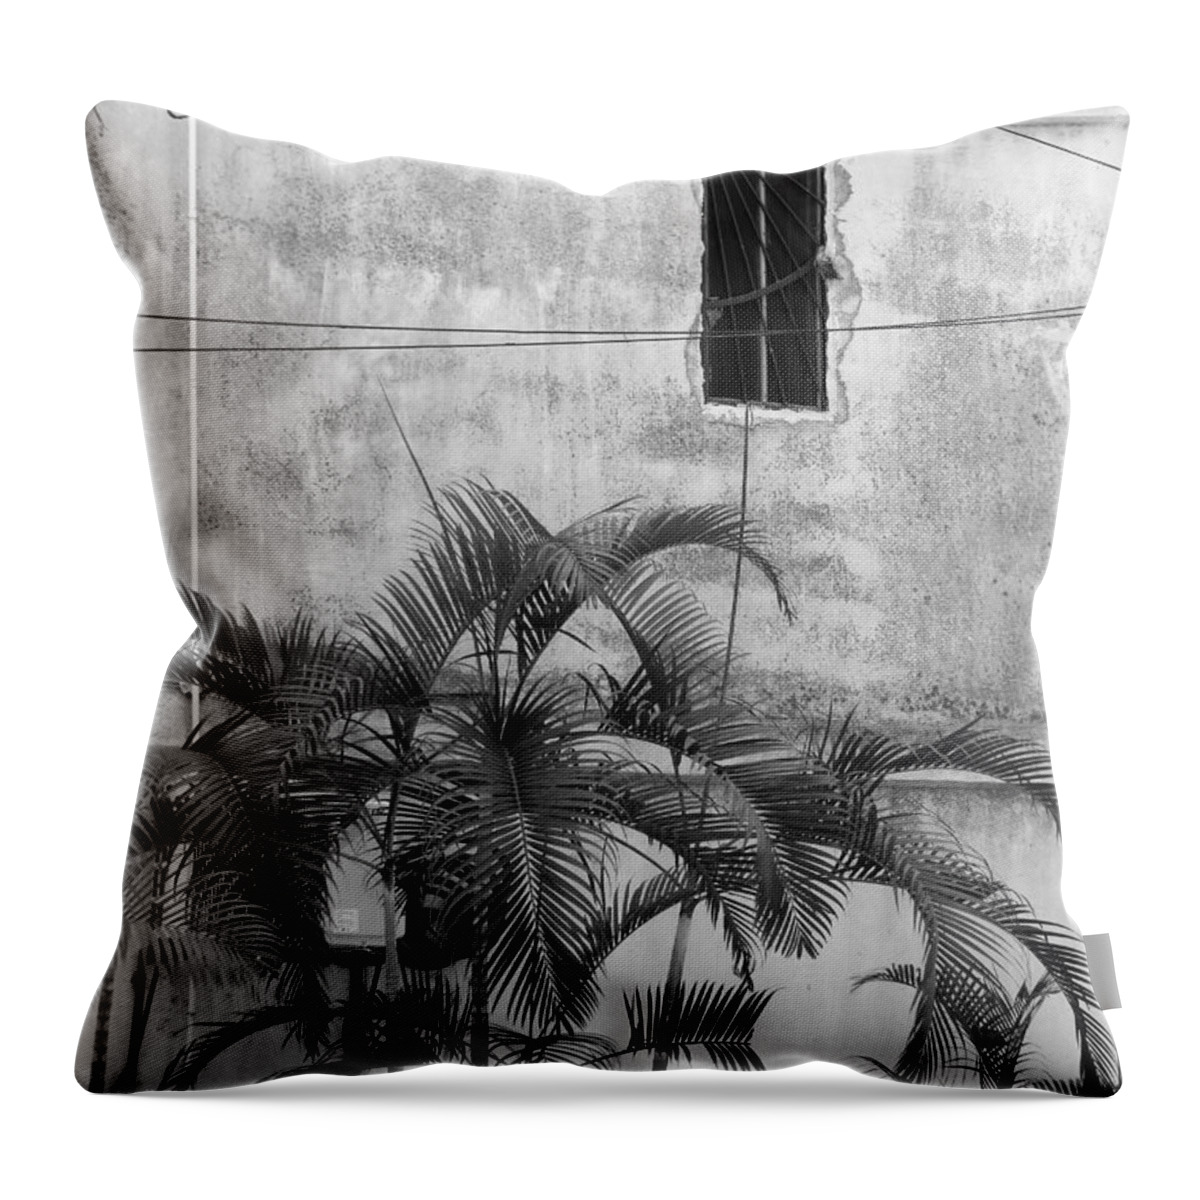 Palms Against A Stucco Wall Throw Pillow featuring the photograph Vacant by Rosanne Licciardi